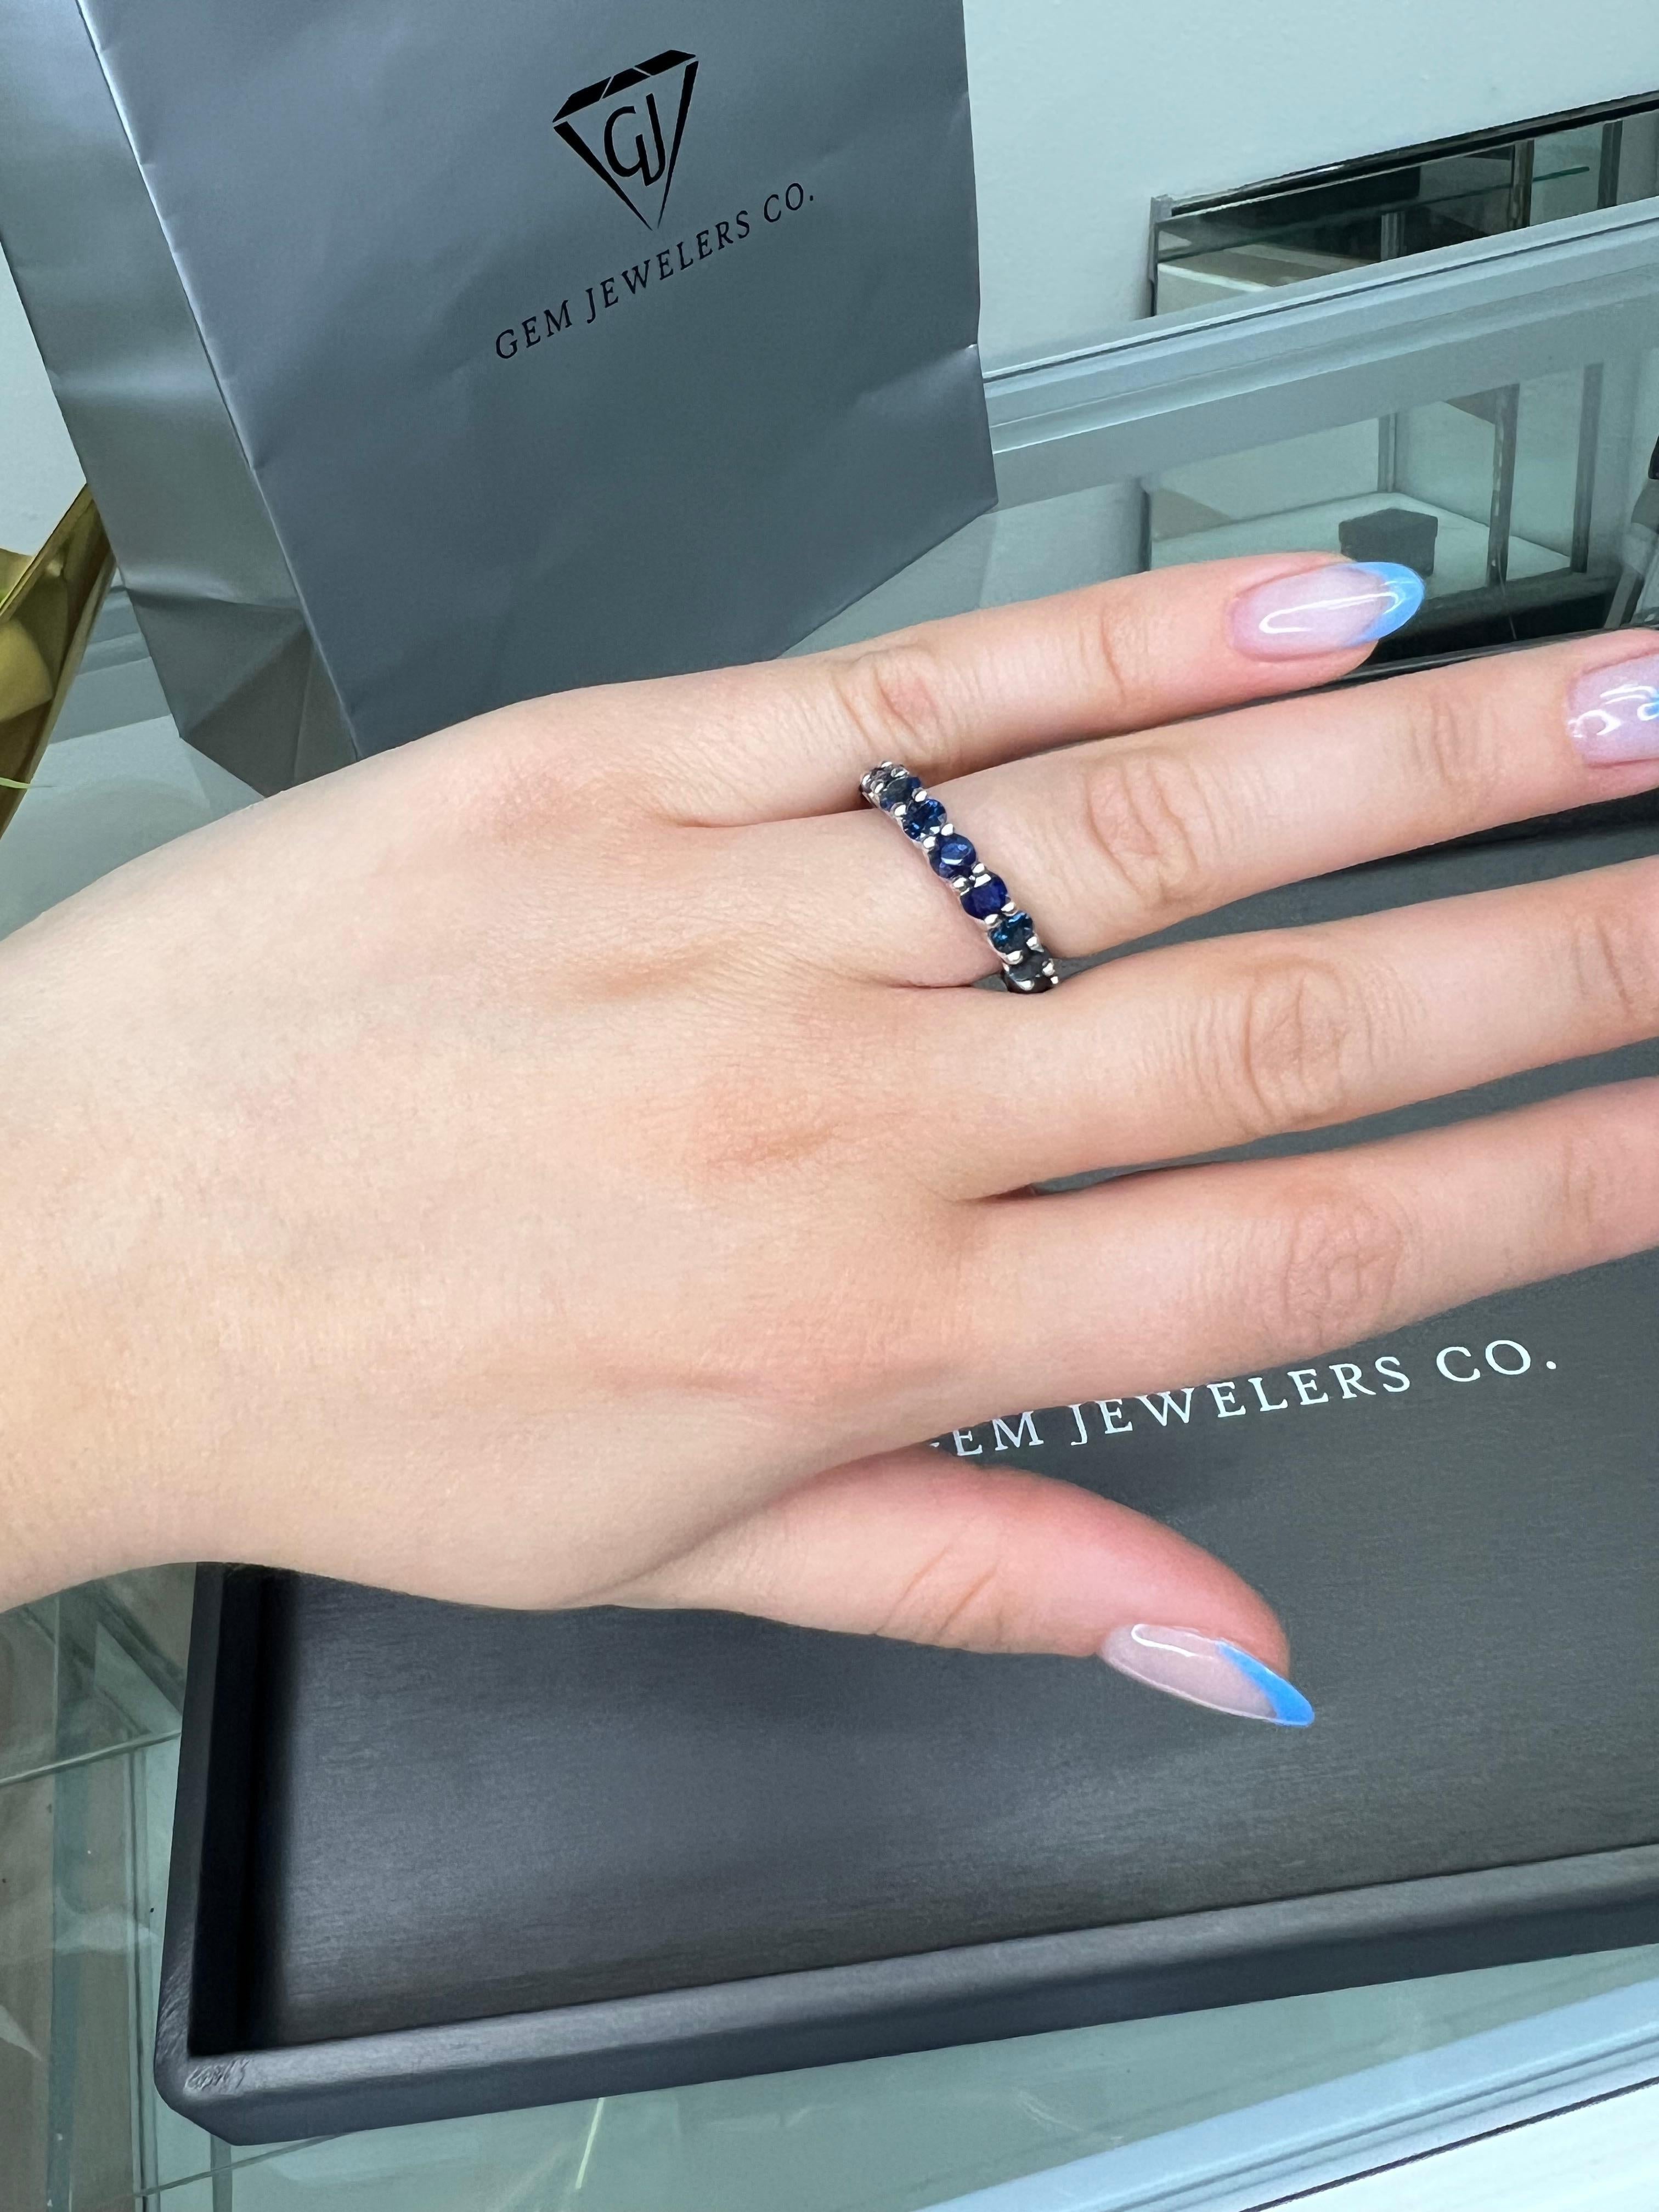 This Blue Sapphire Eternity Band by Gem Jewelers Co. is a must-have for any jewelry lover! Made with the finest 18K White Gold, this eternity band is not only beautiful but also built to last. With a dazzling row of  4.27 Carat Natural Blue